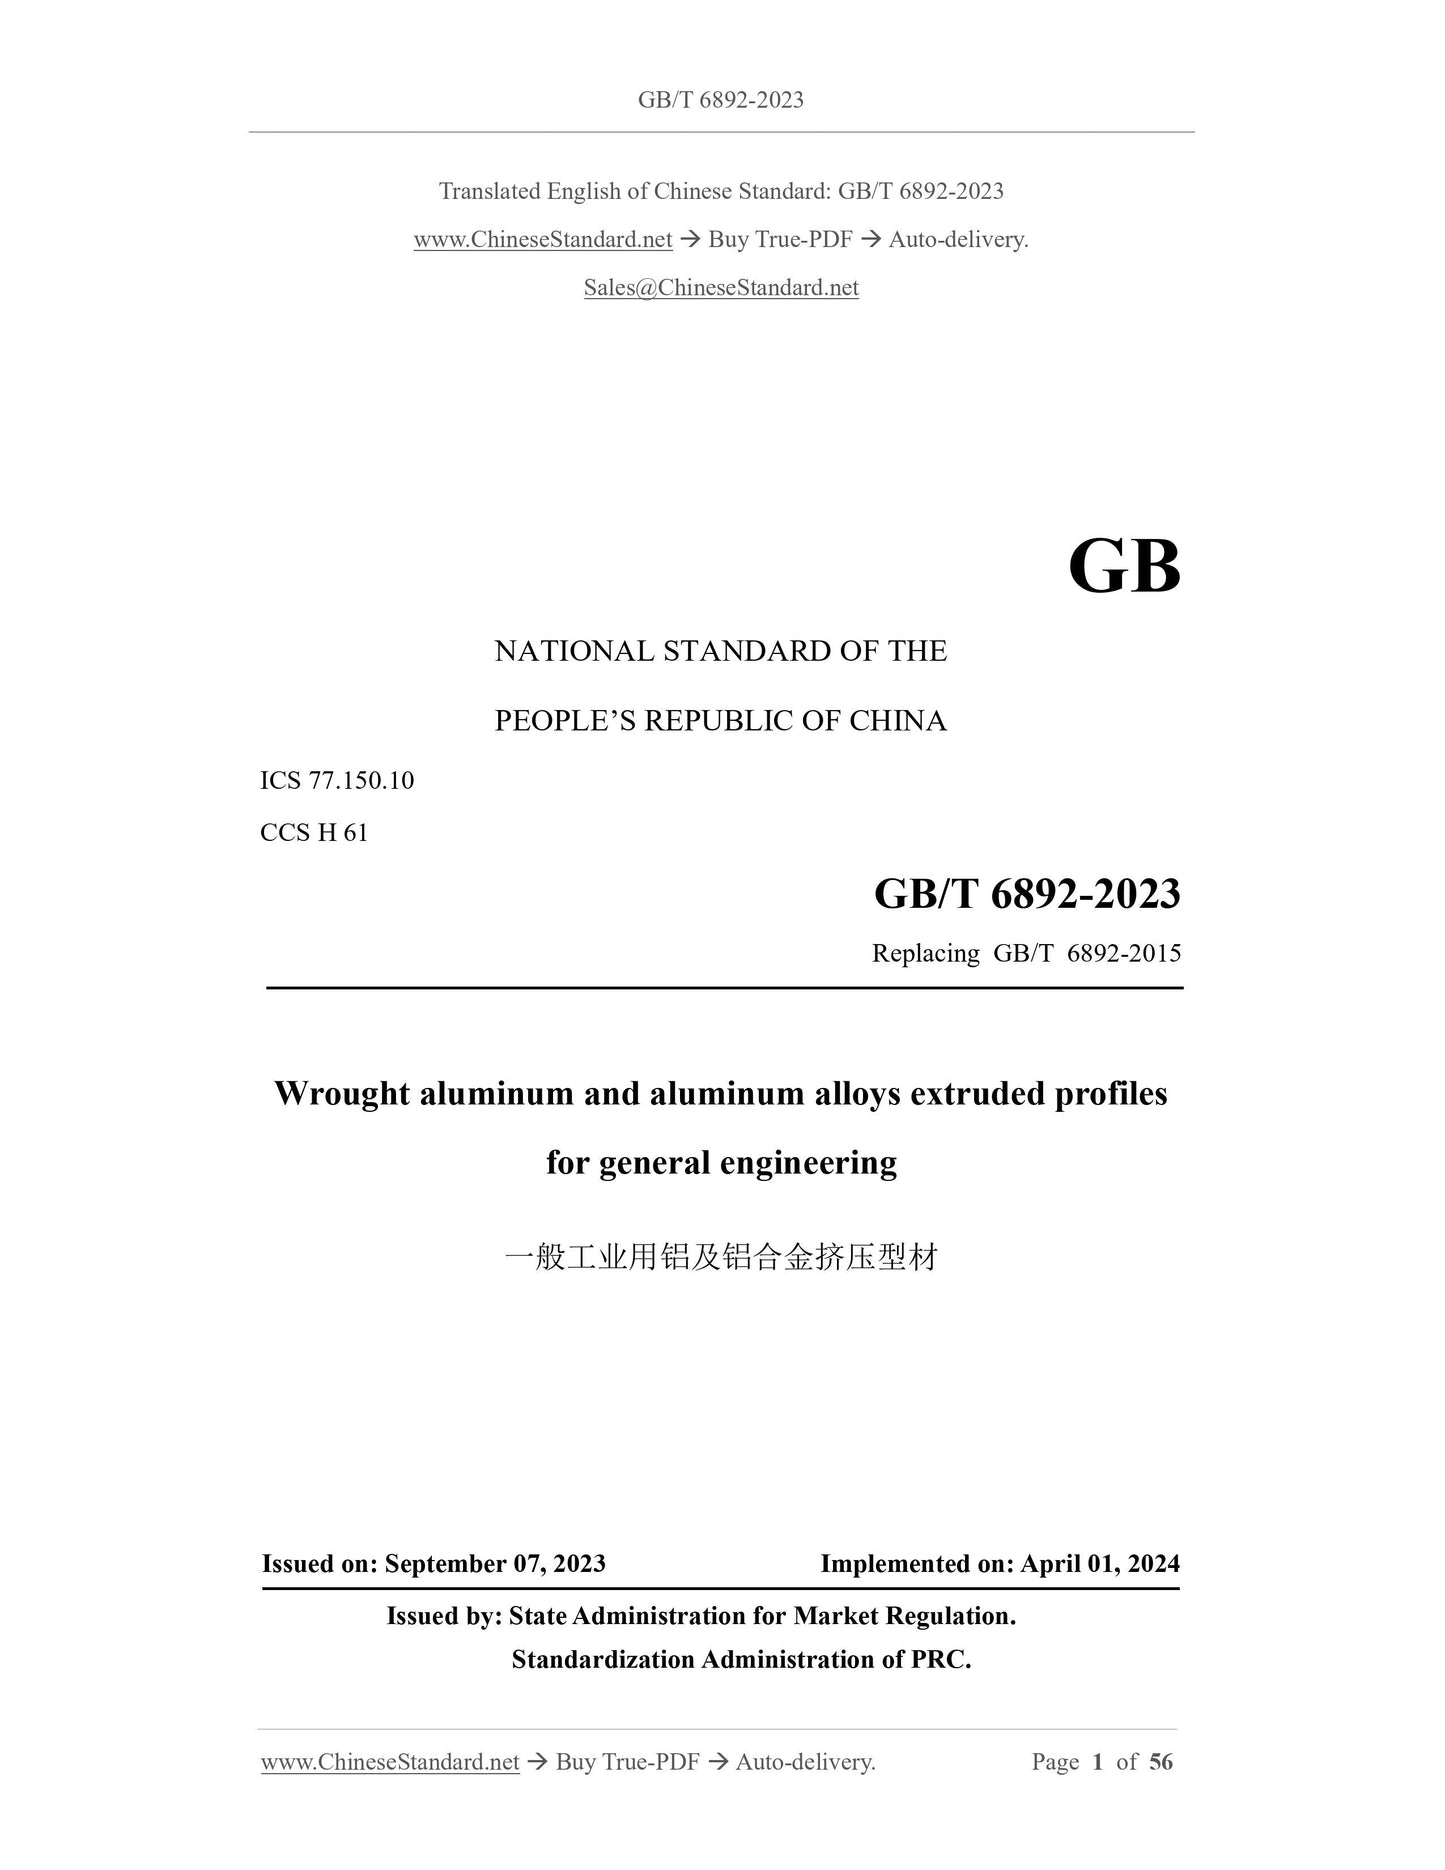 GB/T 6892-2023 Page 1